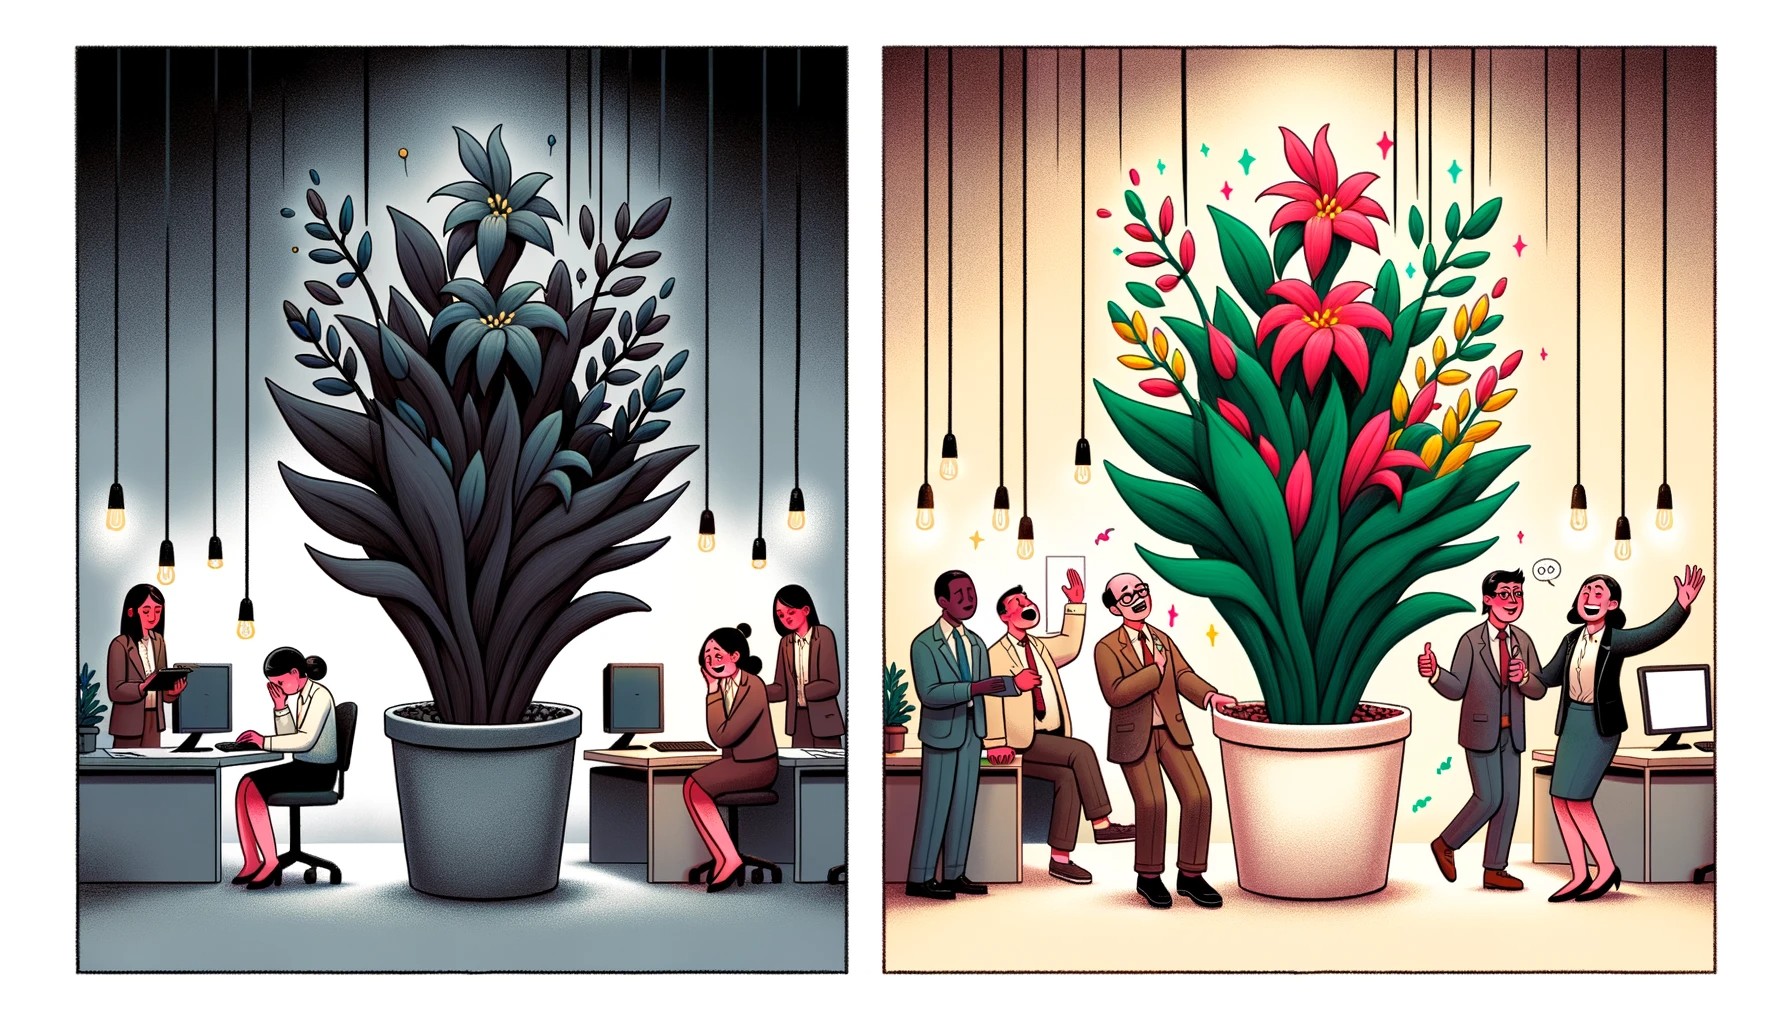 Wide illustration showcasing two distinct scenarios side by side by dalle 3